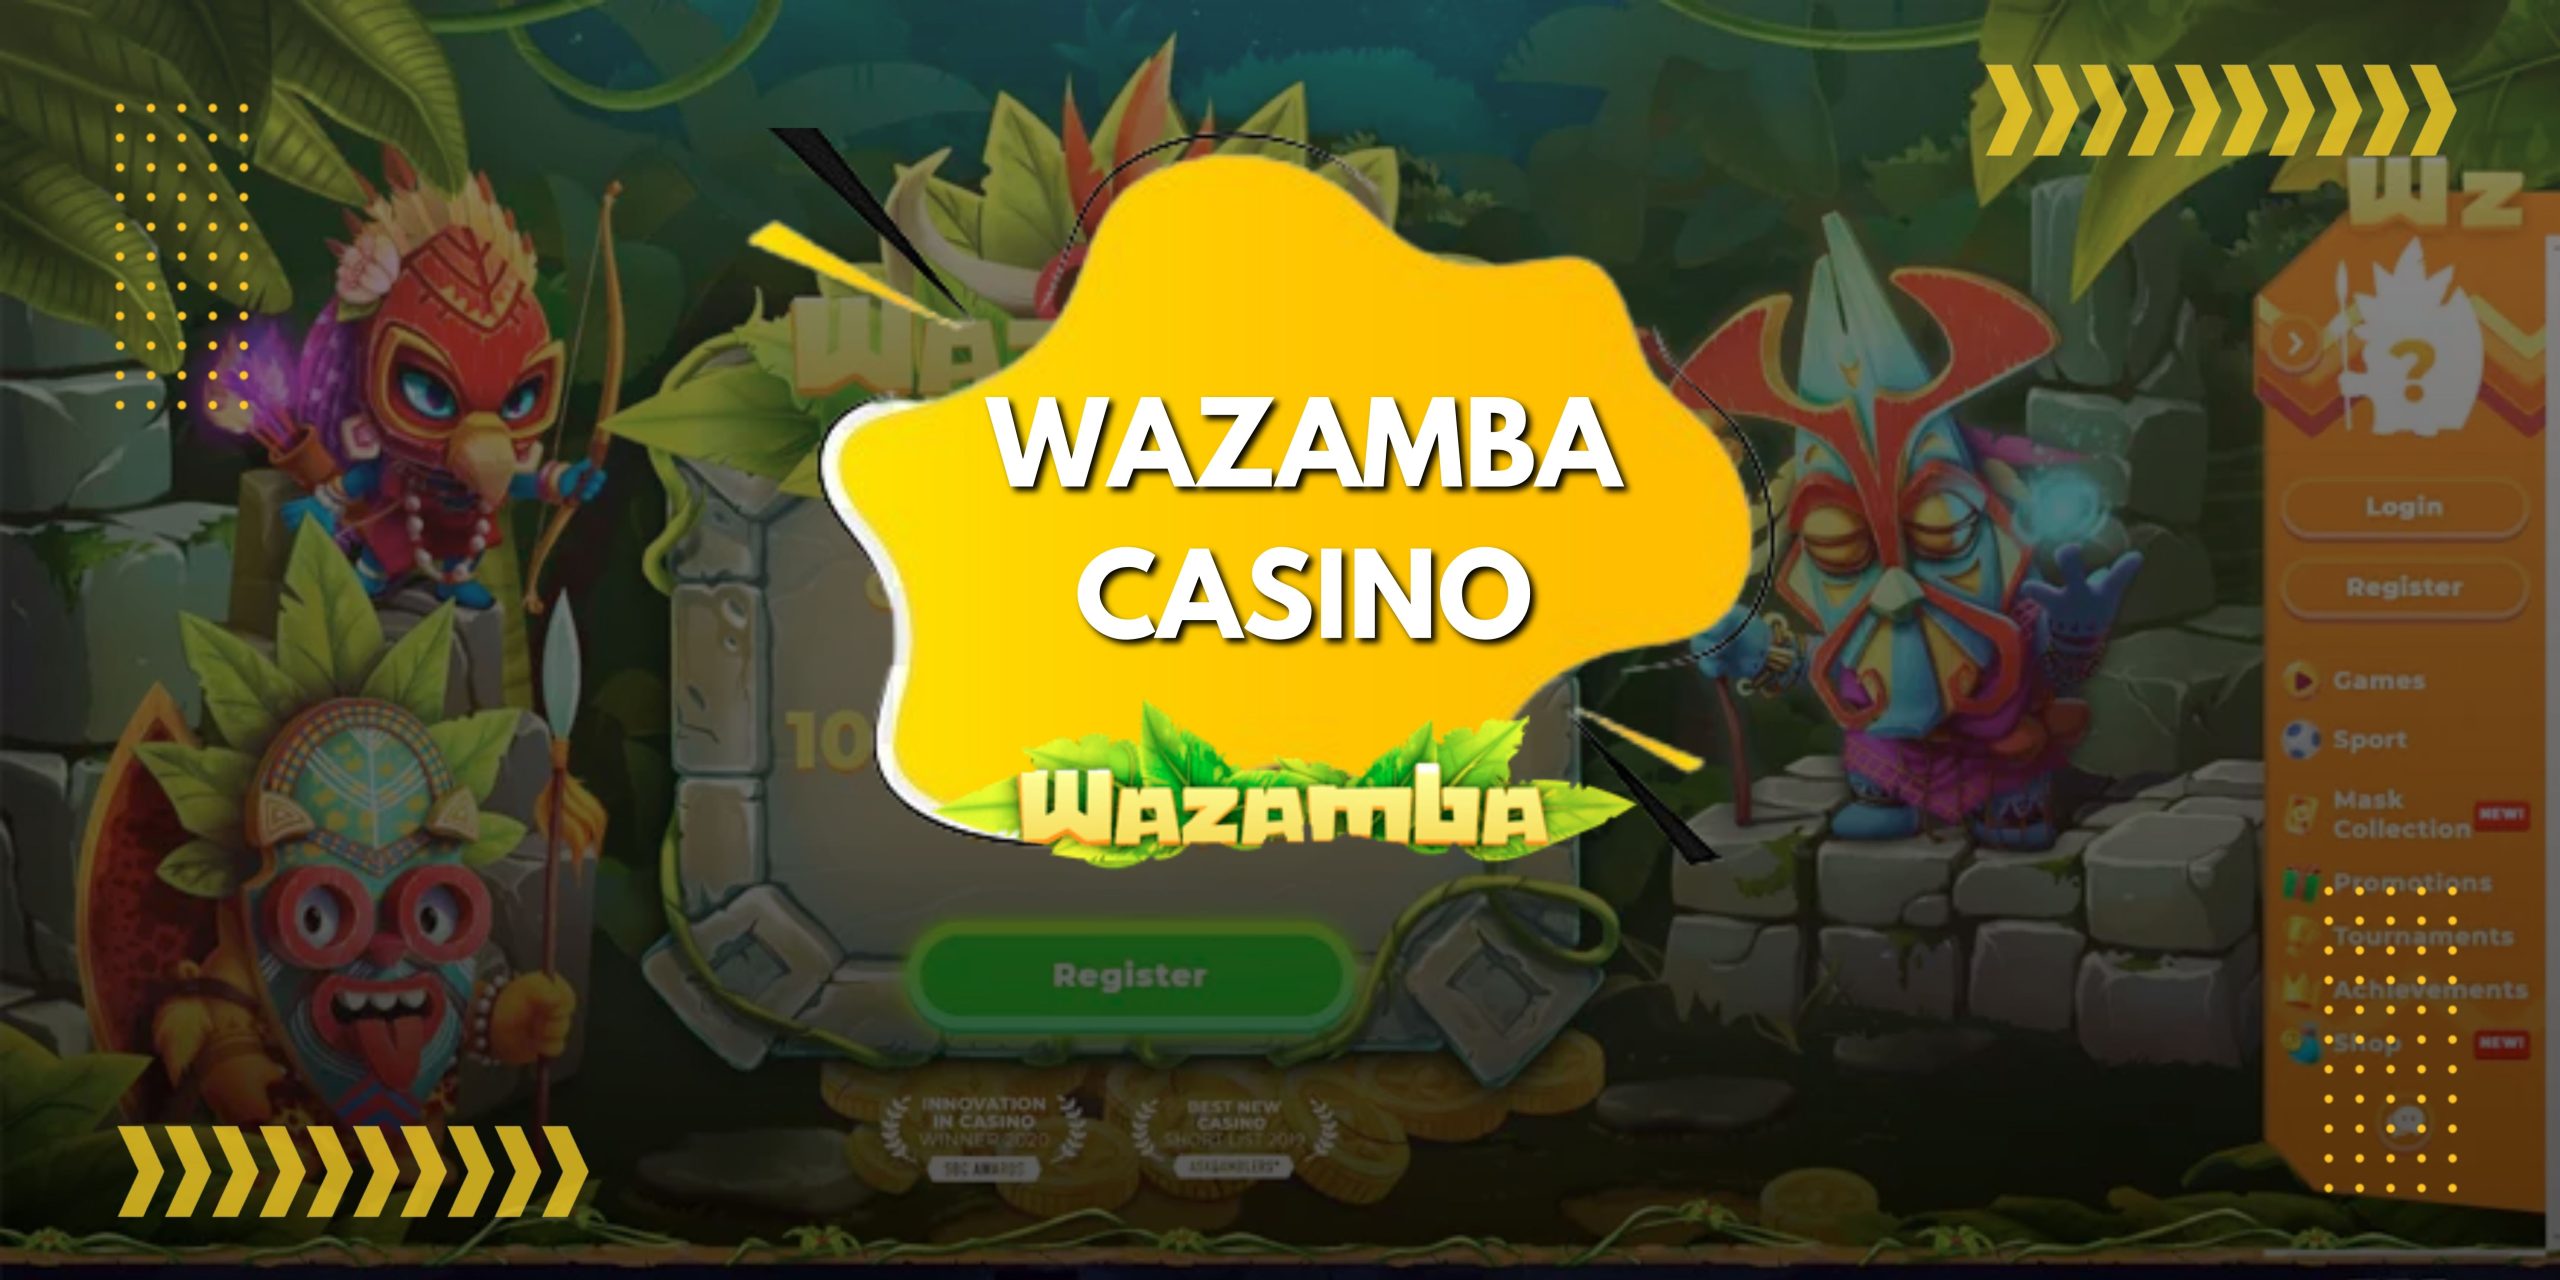 The Best Gambling Entertainment from Top Developers: Find out more about Wazamba Casino